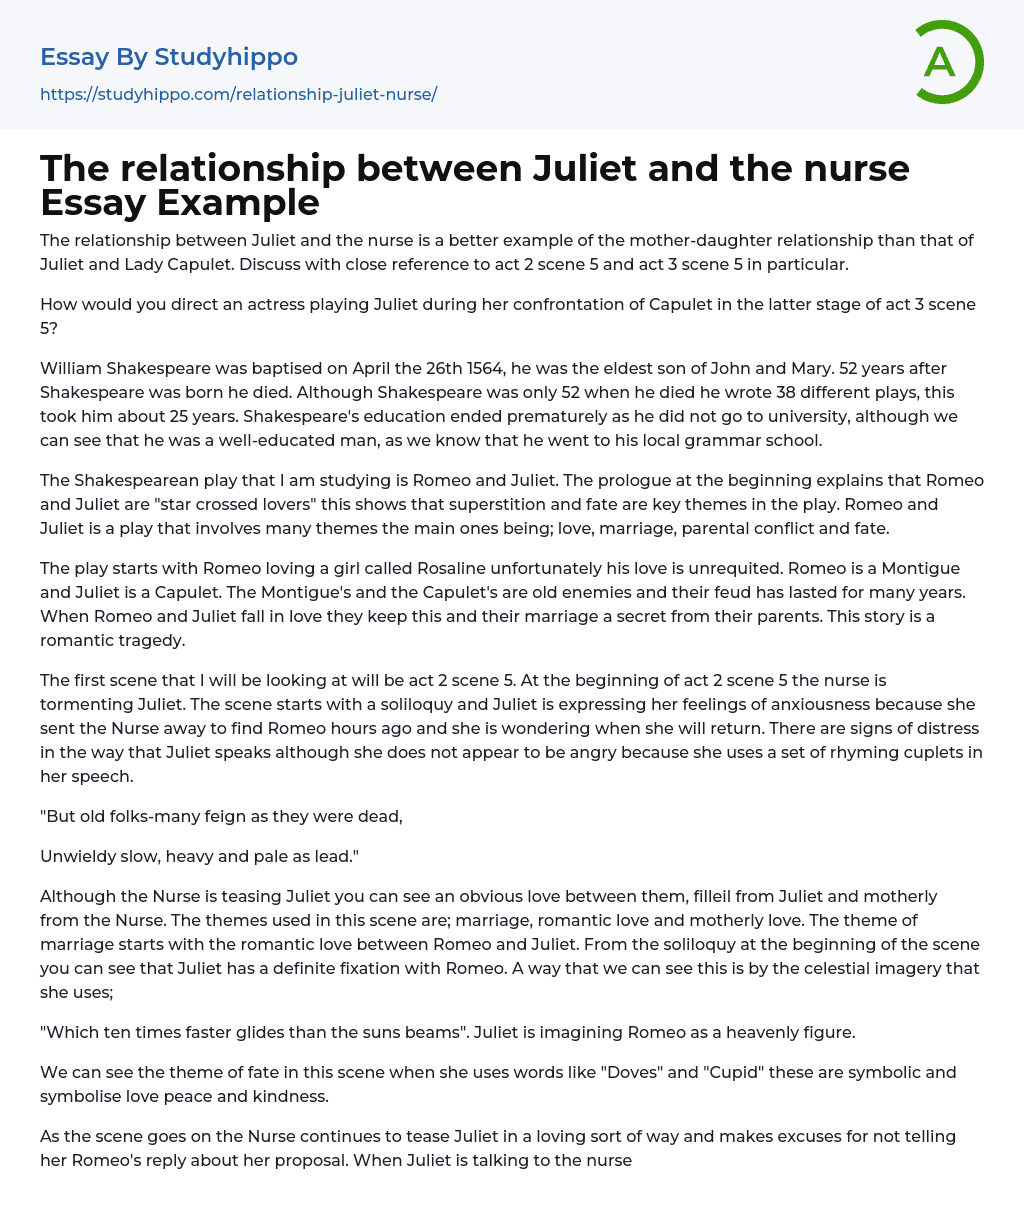 The relationship between Juliet and the nurse Essay Example